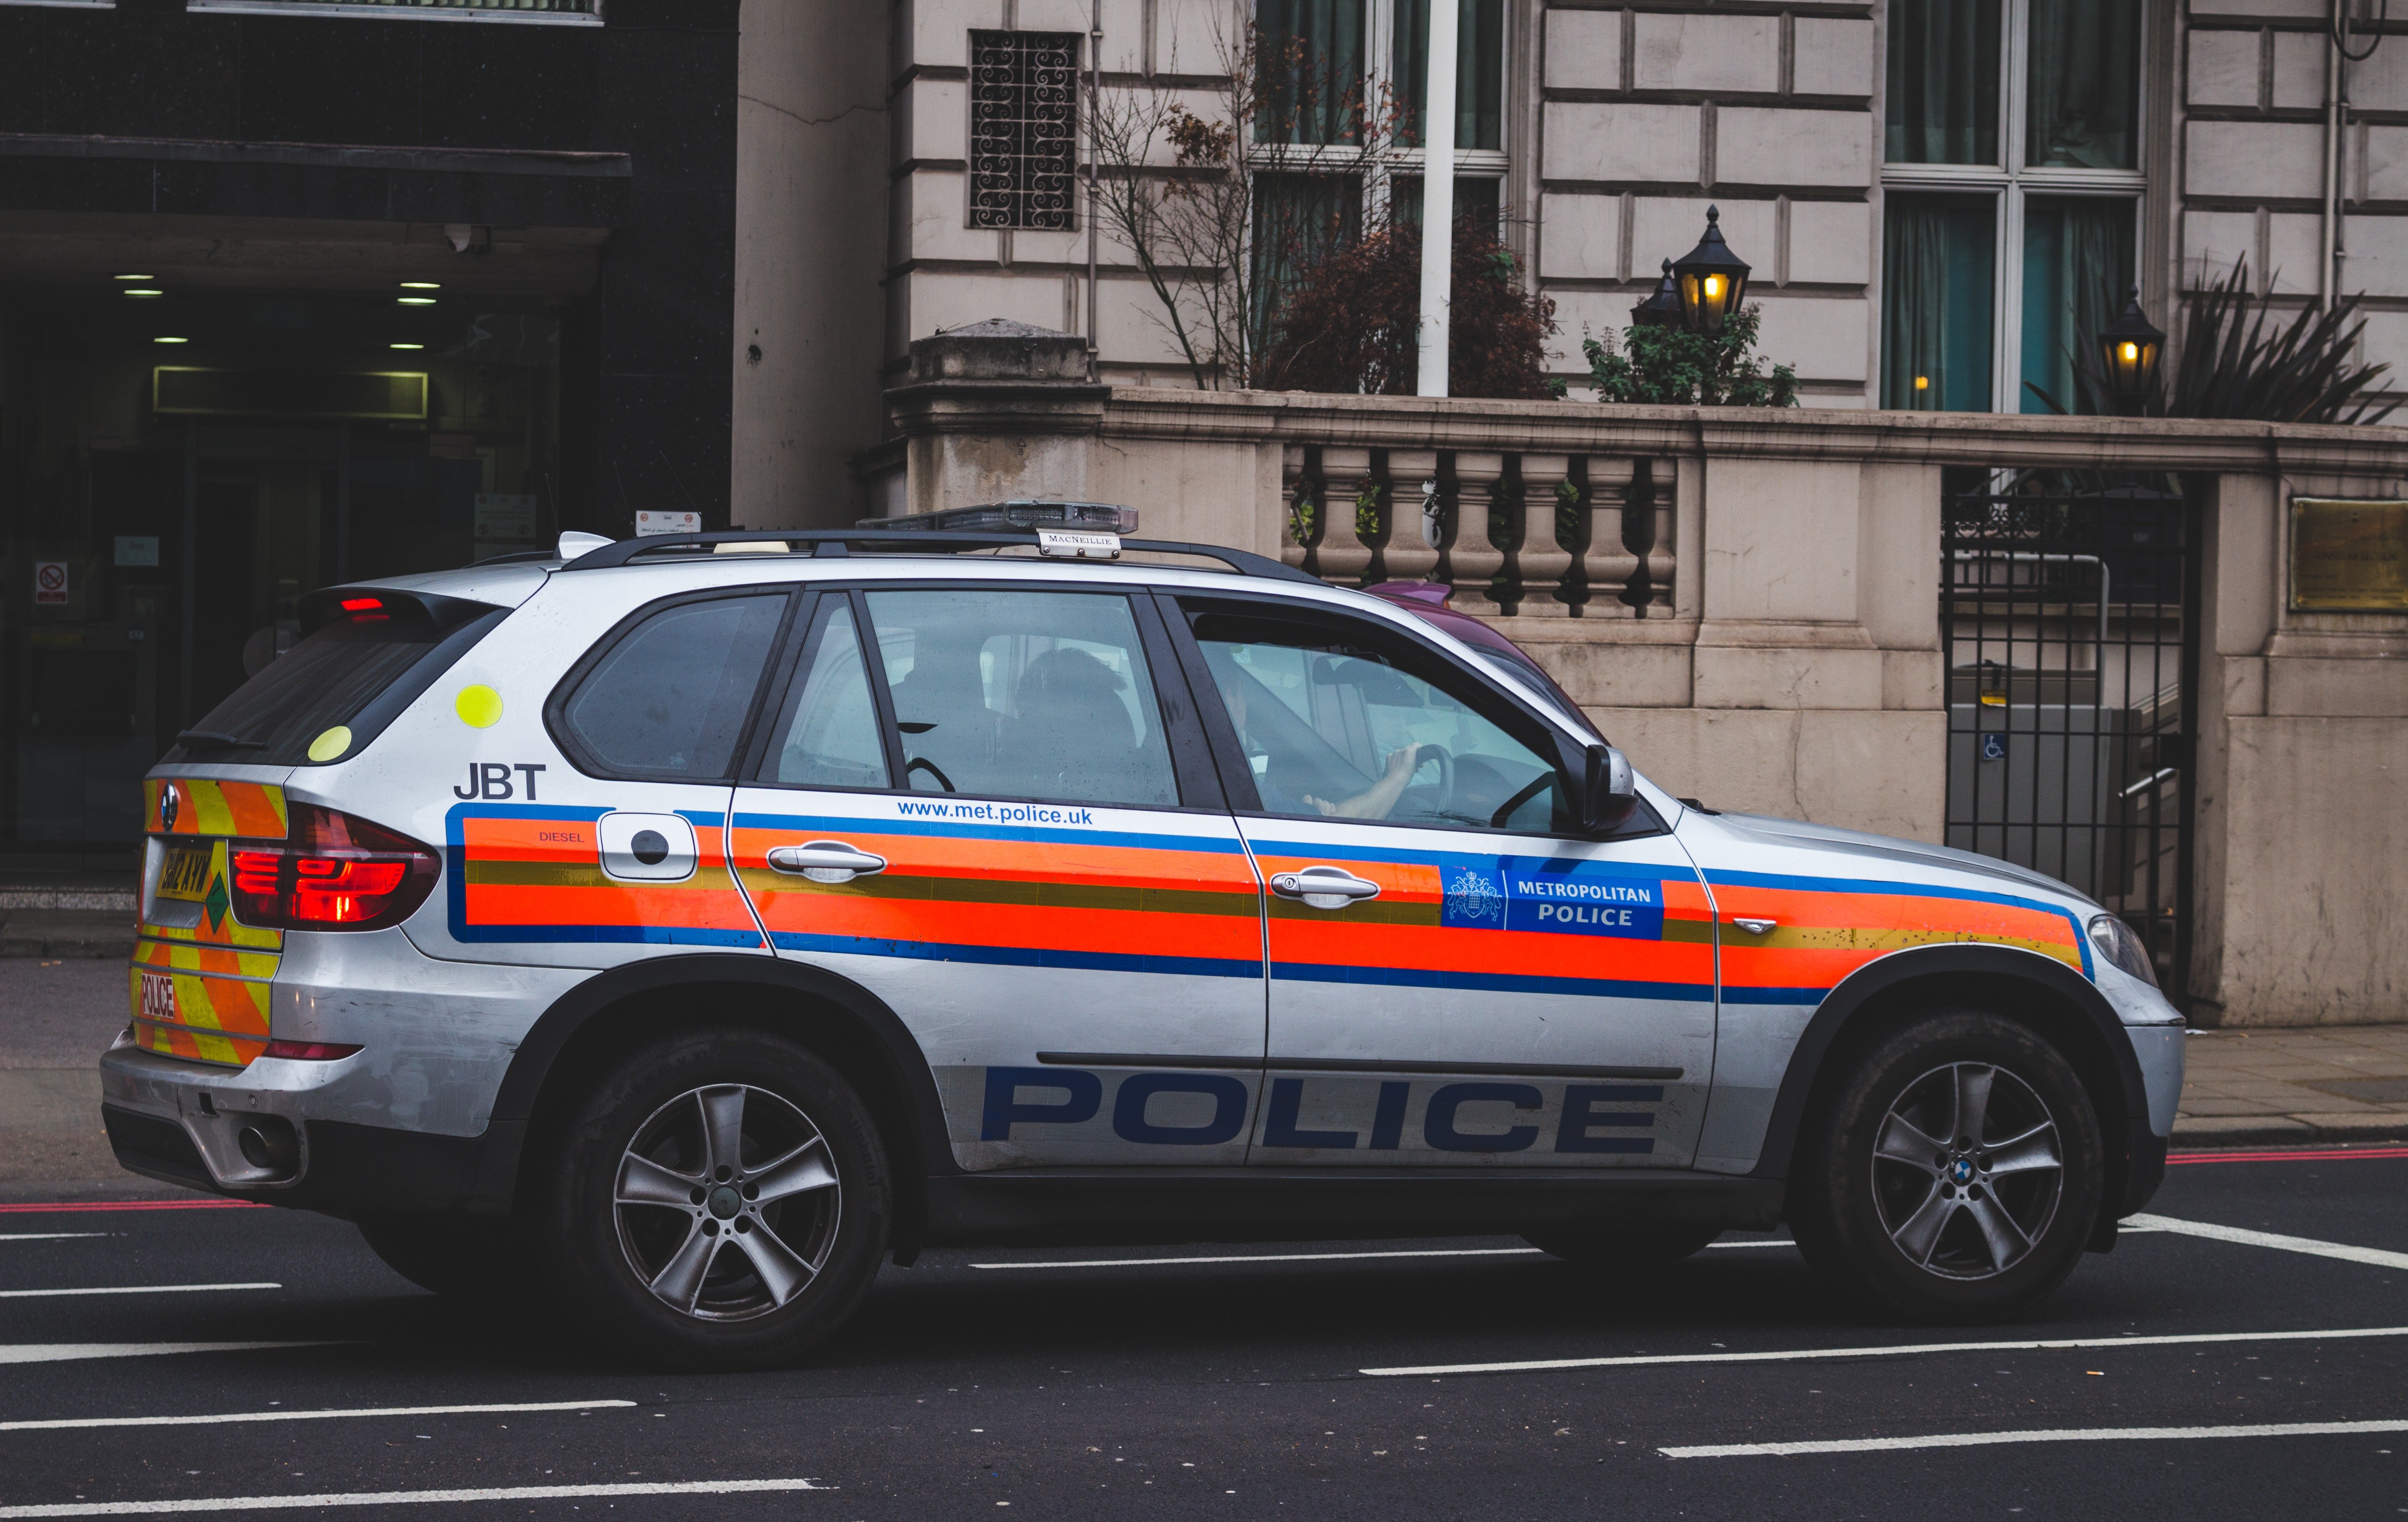 Pictured - A police vehicle passing by | Source: Pexels